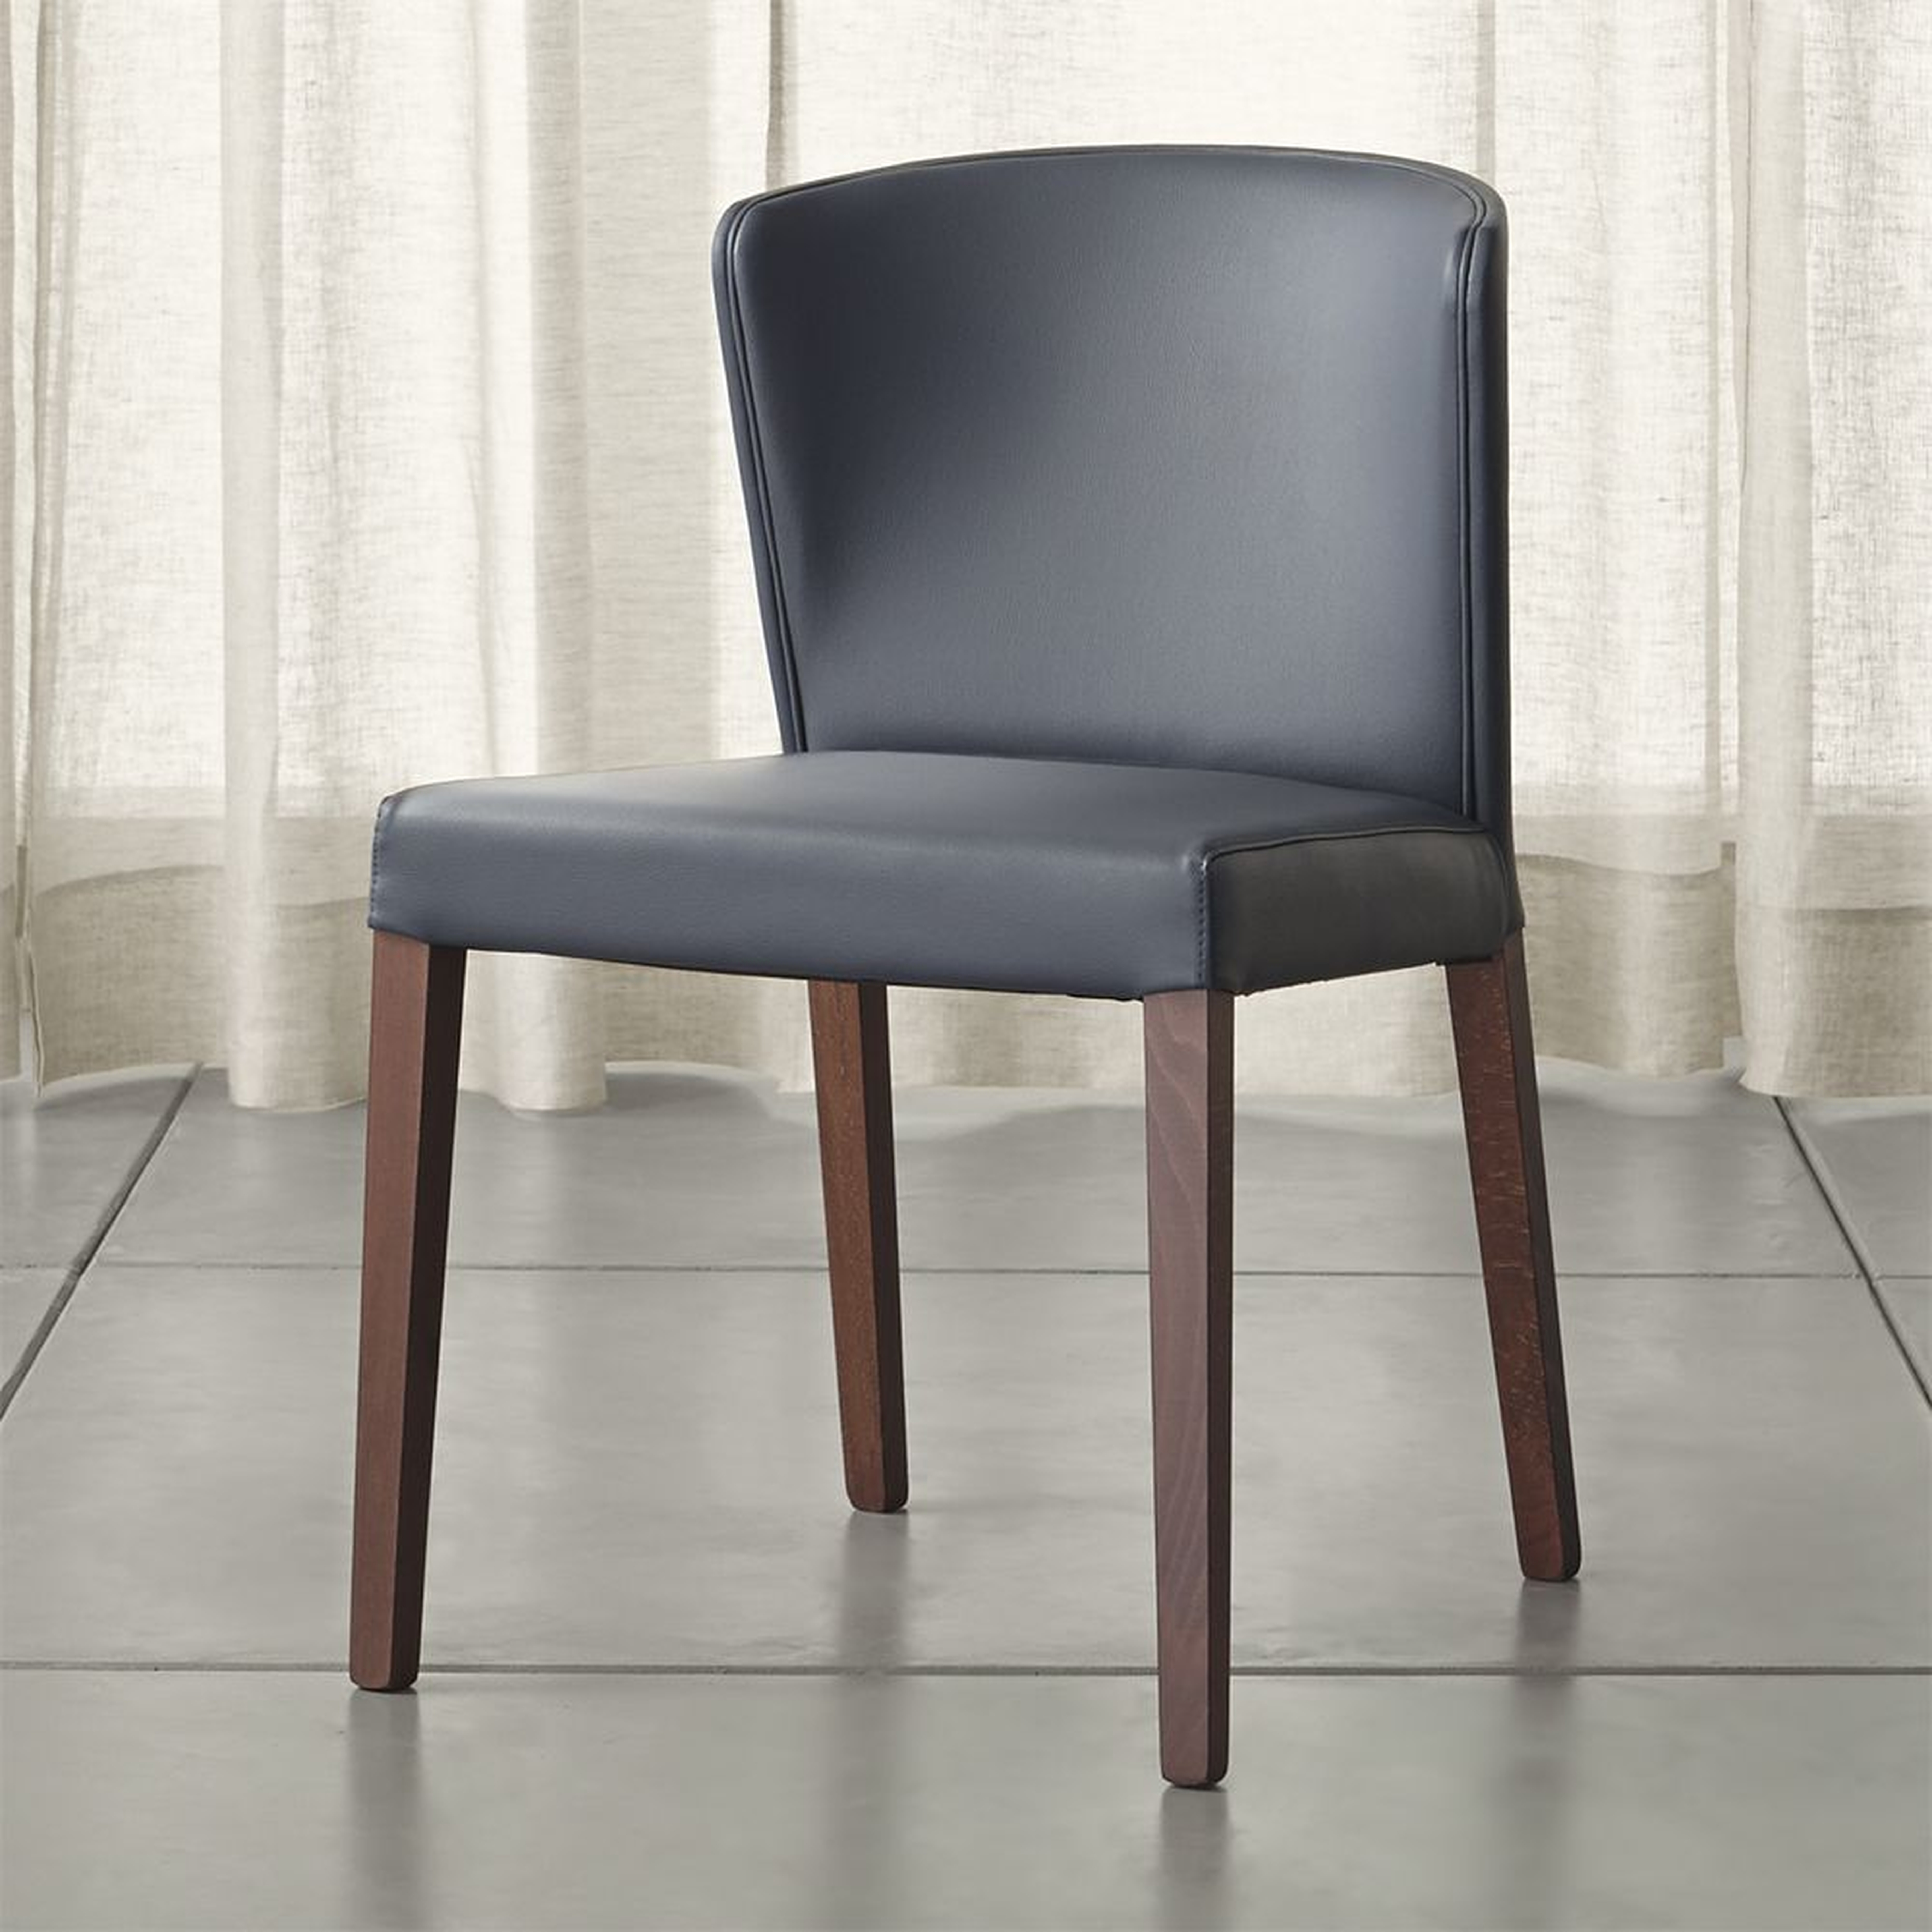 Curran Grey Dining Chair - Crate and Barrel